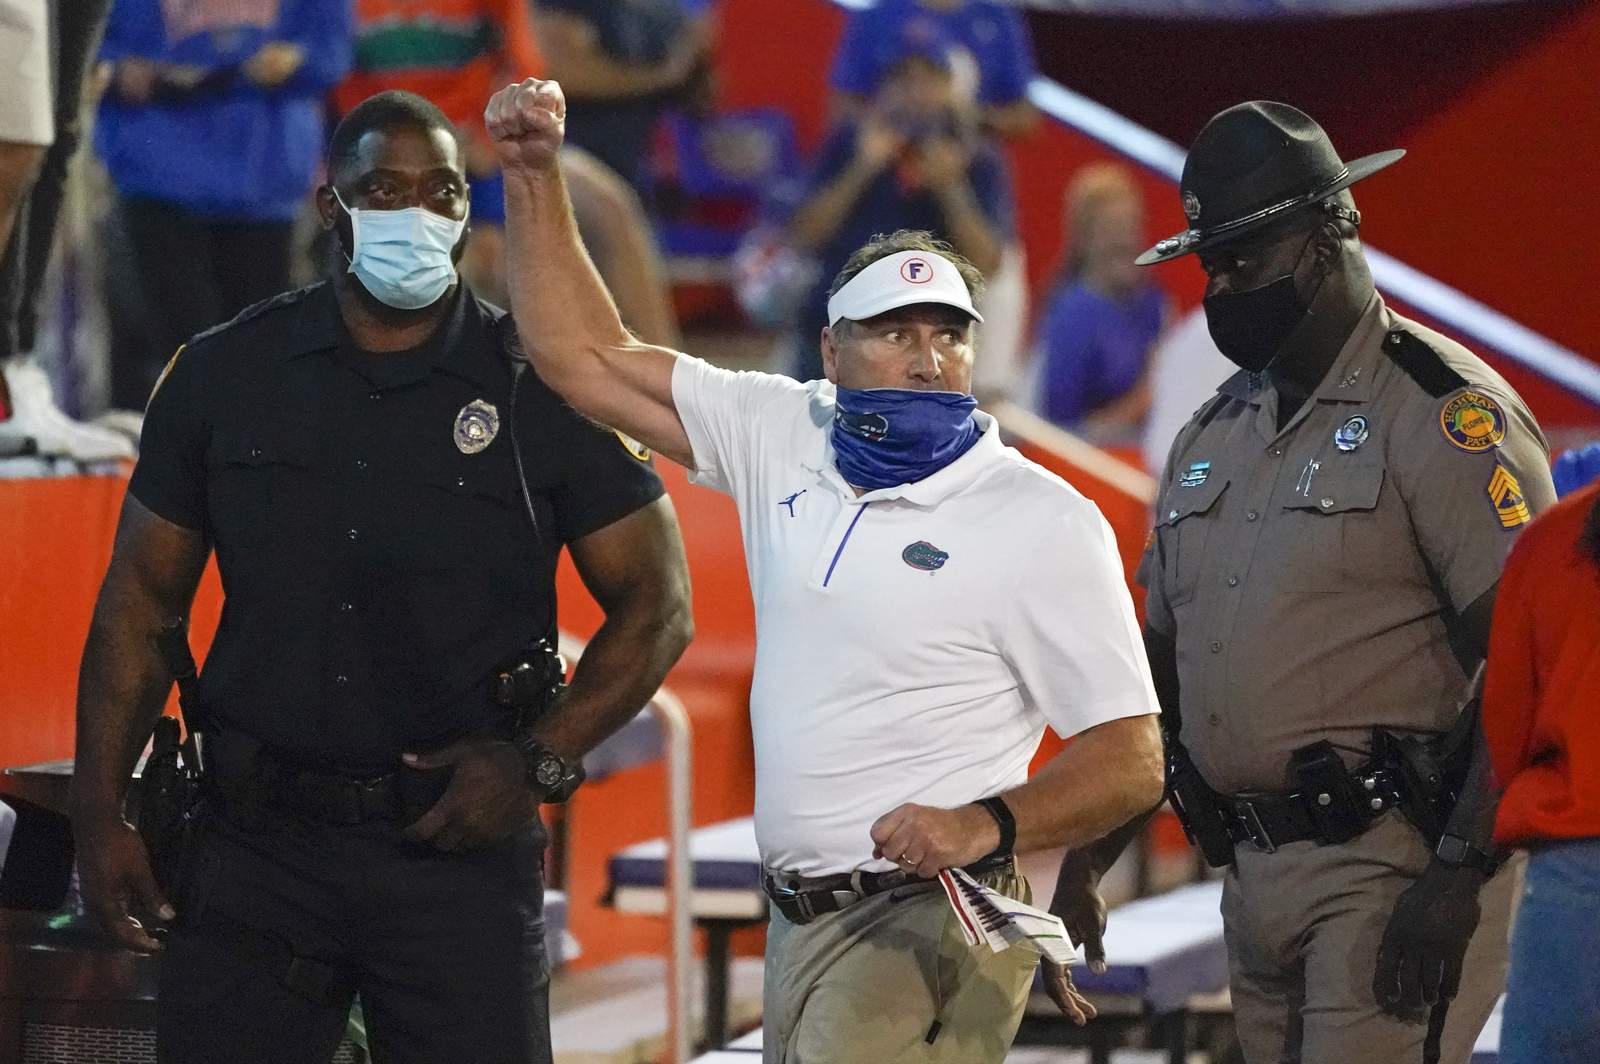 Florida’s Mullen’s uneven month ends in Darth Vader costume